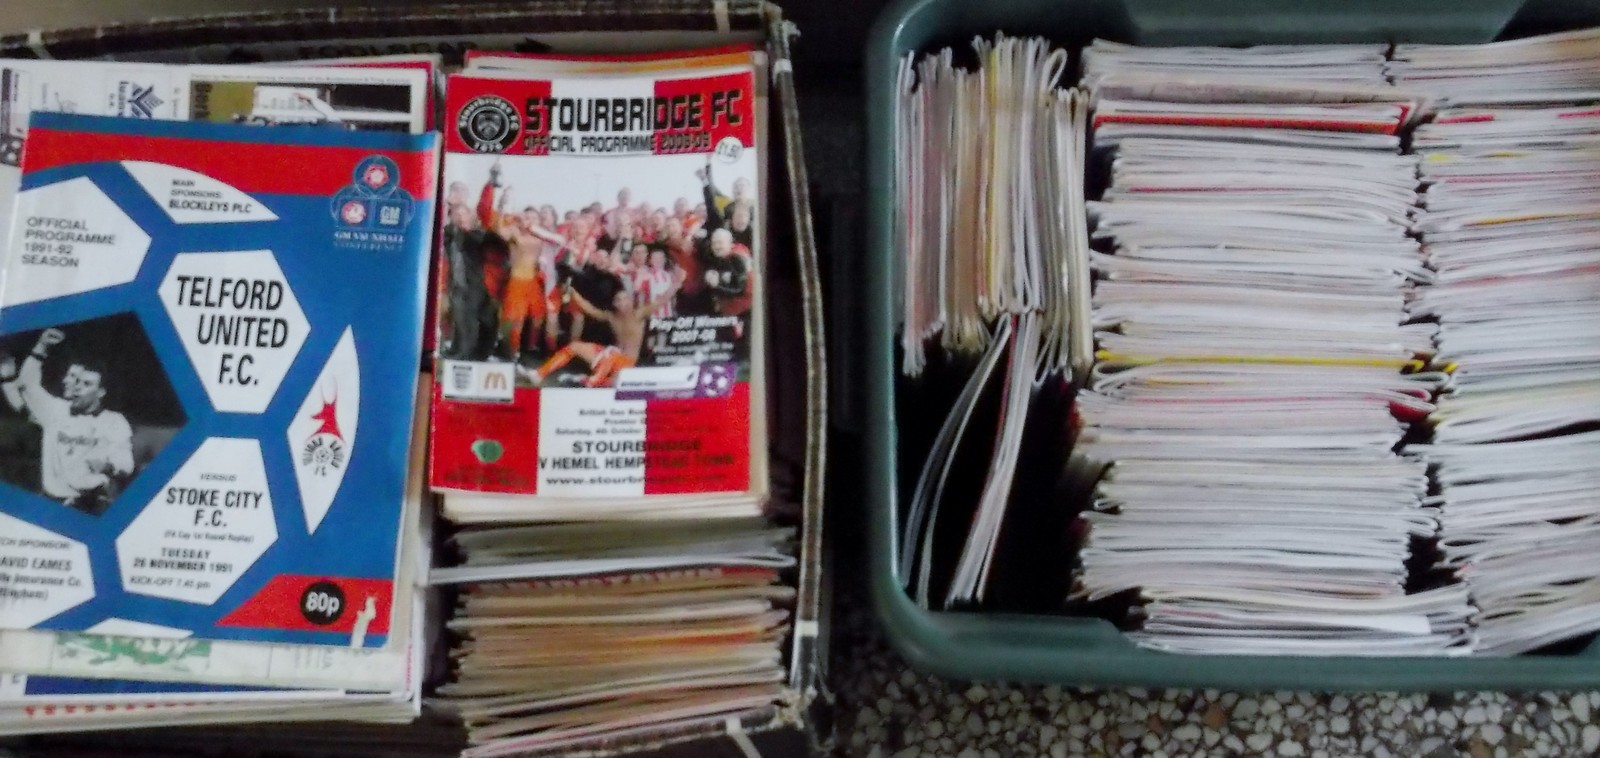 LARGE COLLECTION OF NON-LEAGUE PROGRAMMES Two large box's containing over 700 programmes from the